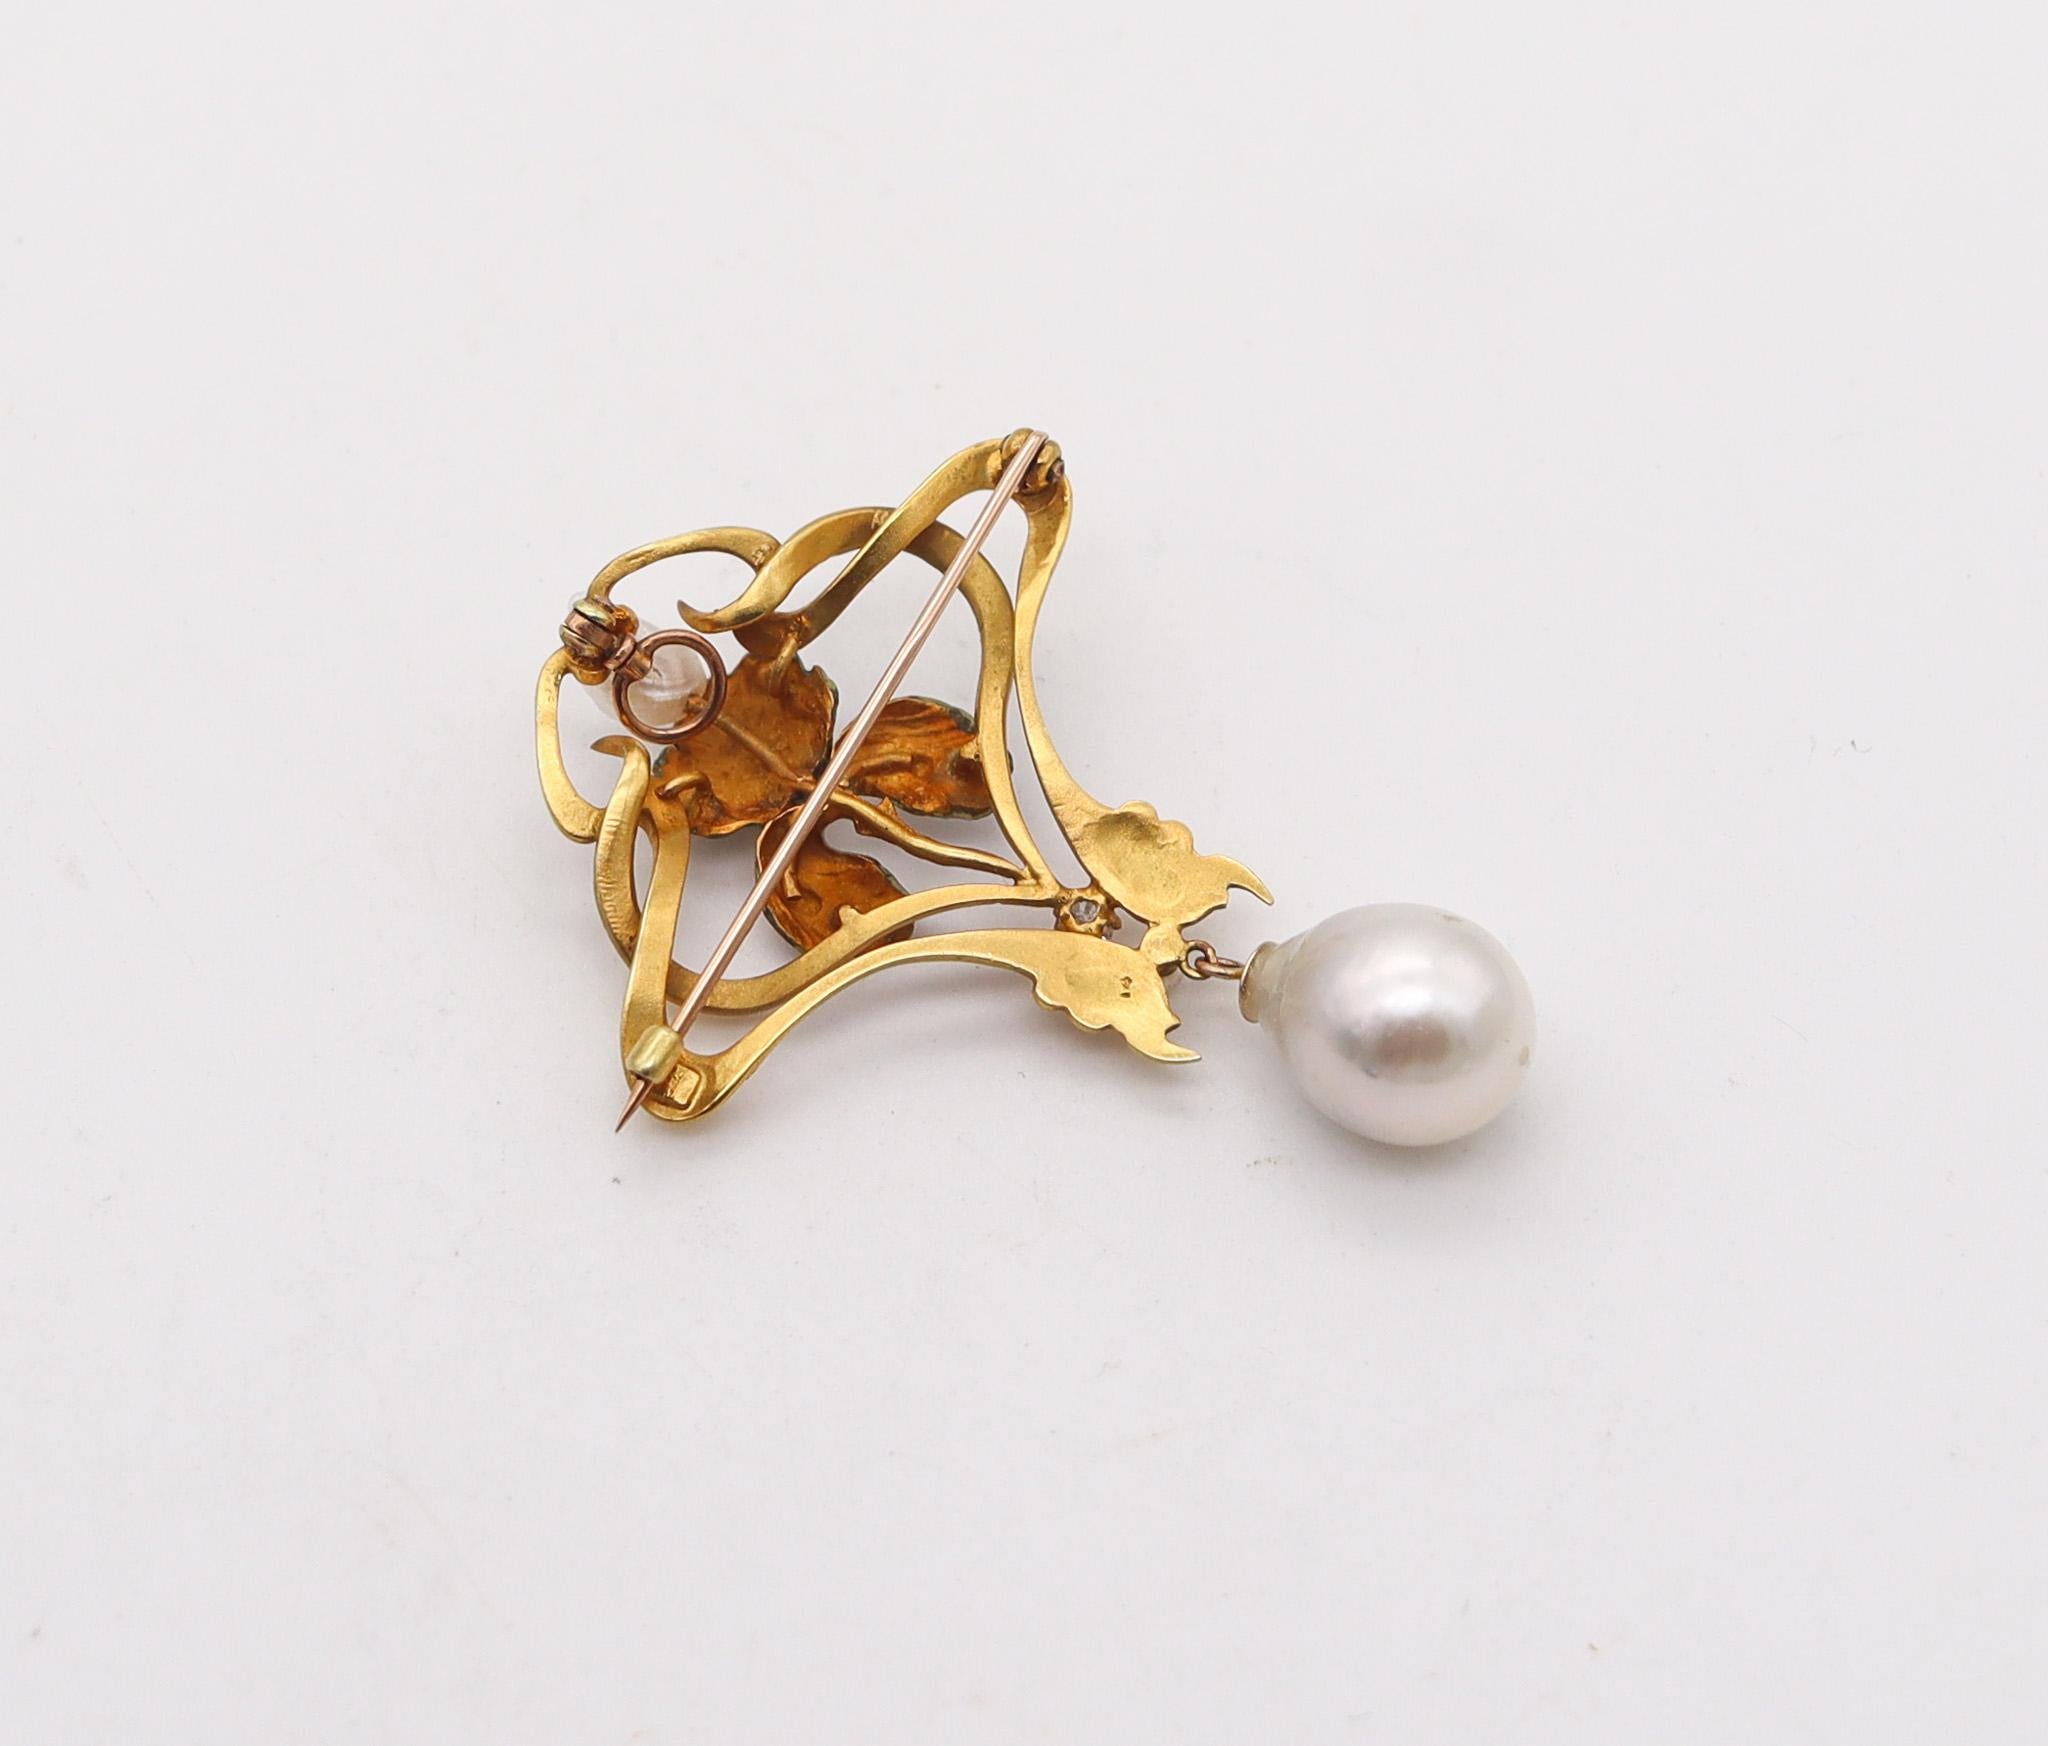 Mixed Cut Art Nouveau 1900 Enamel Orchid Pendant In 14Kt Gold With Diamond And Pearls For Sale